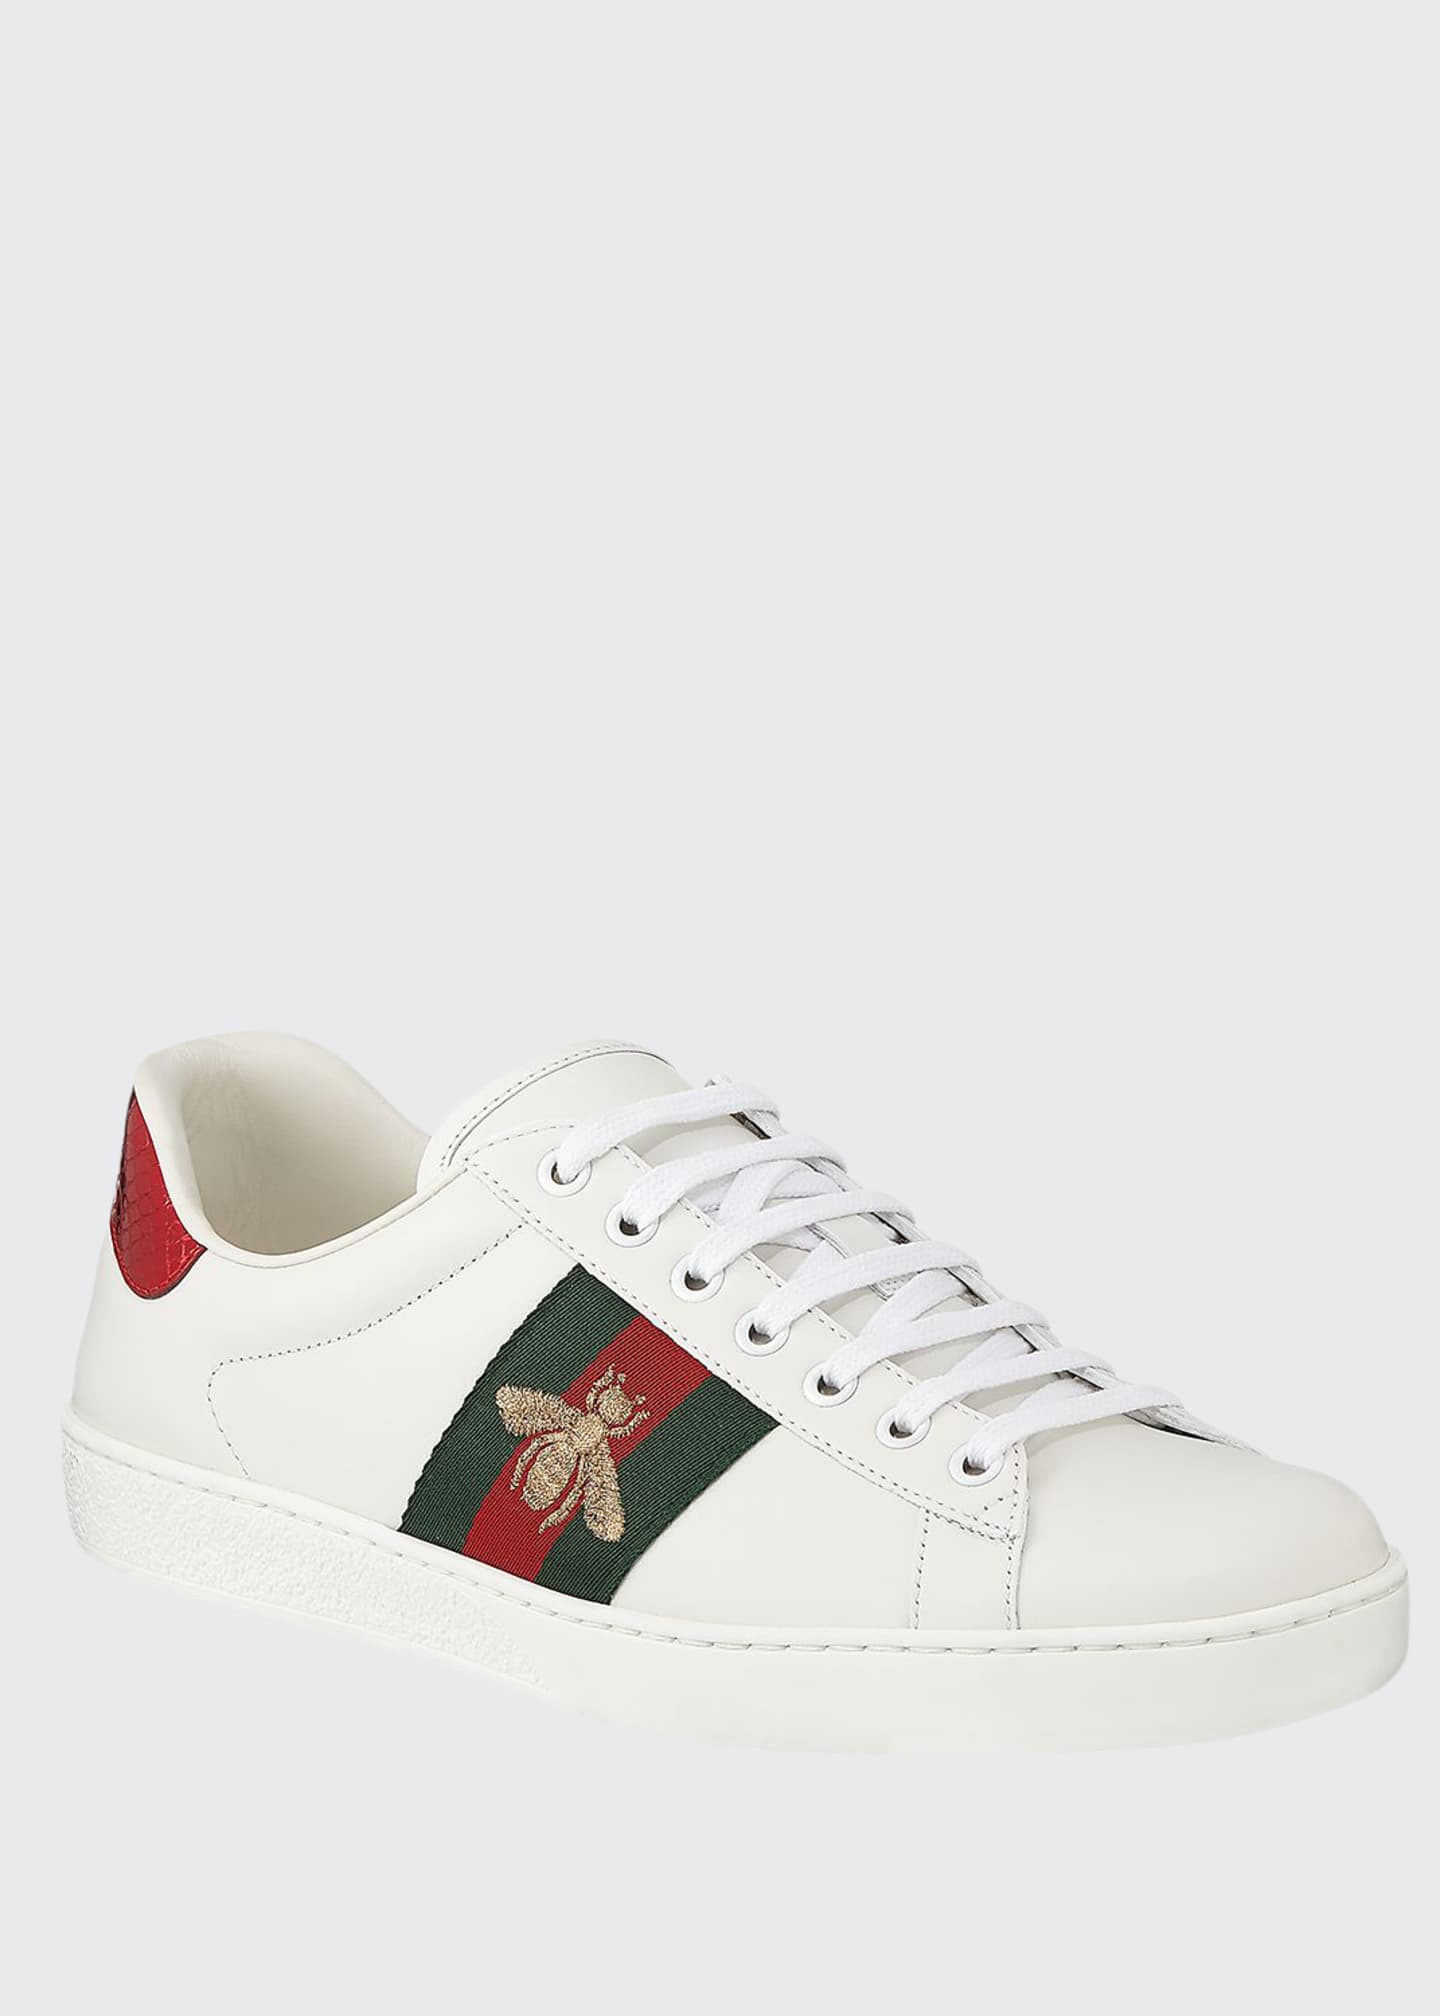 Gucci Shoes for Women at Bergdorf Goodman